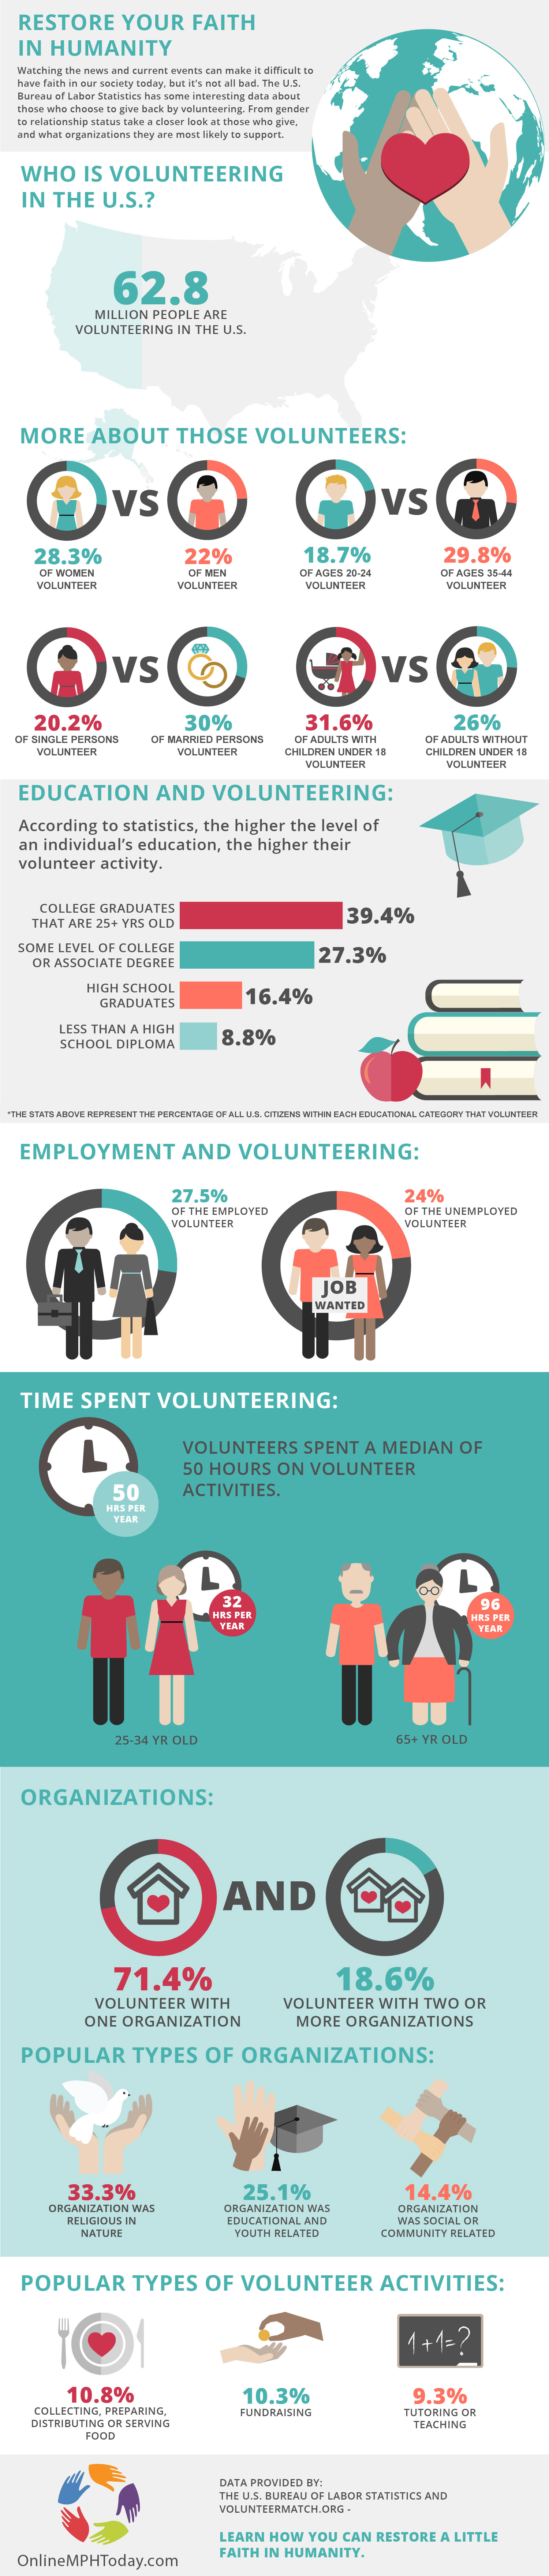 2015 Volunteer Statistics Infographic by Online MPH Today